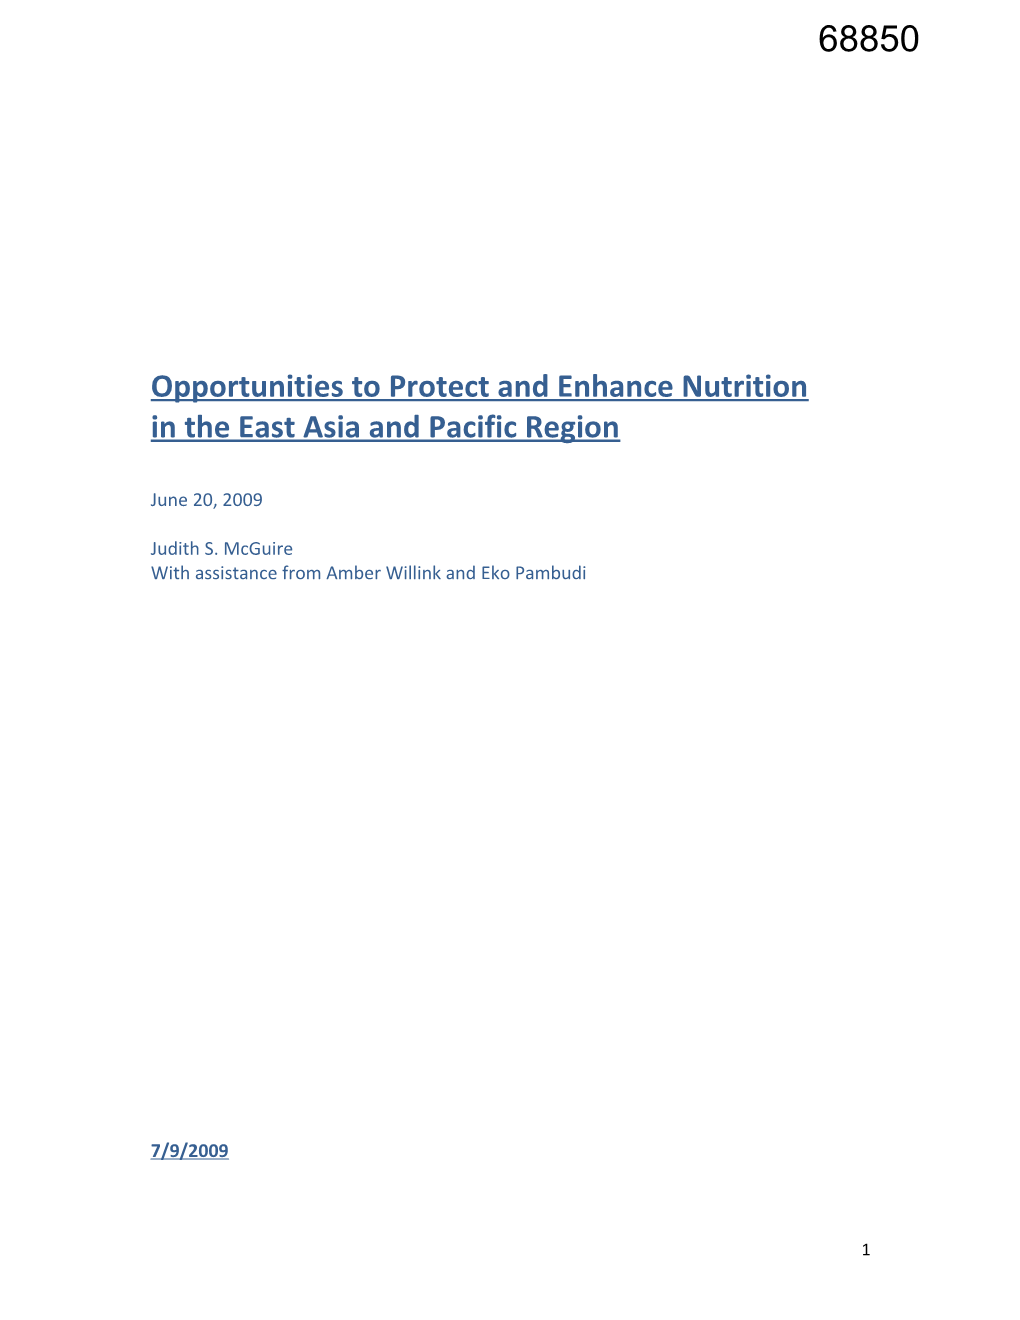 Opportunities to Protect and Enhance Nutrition